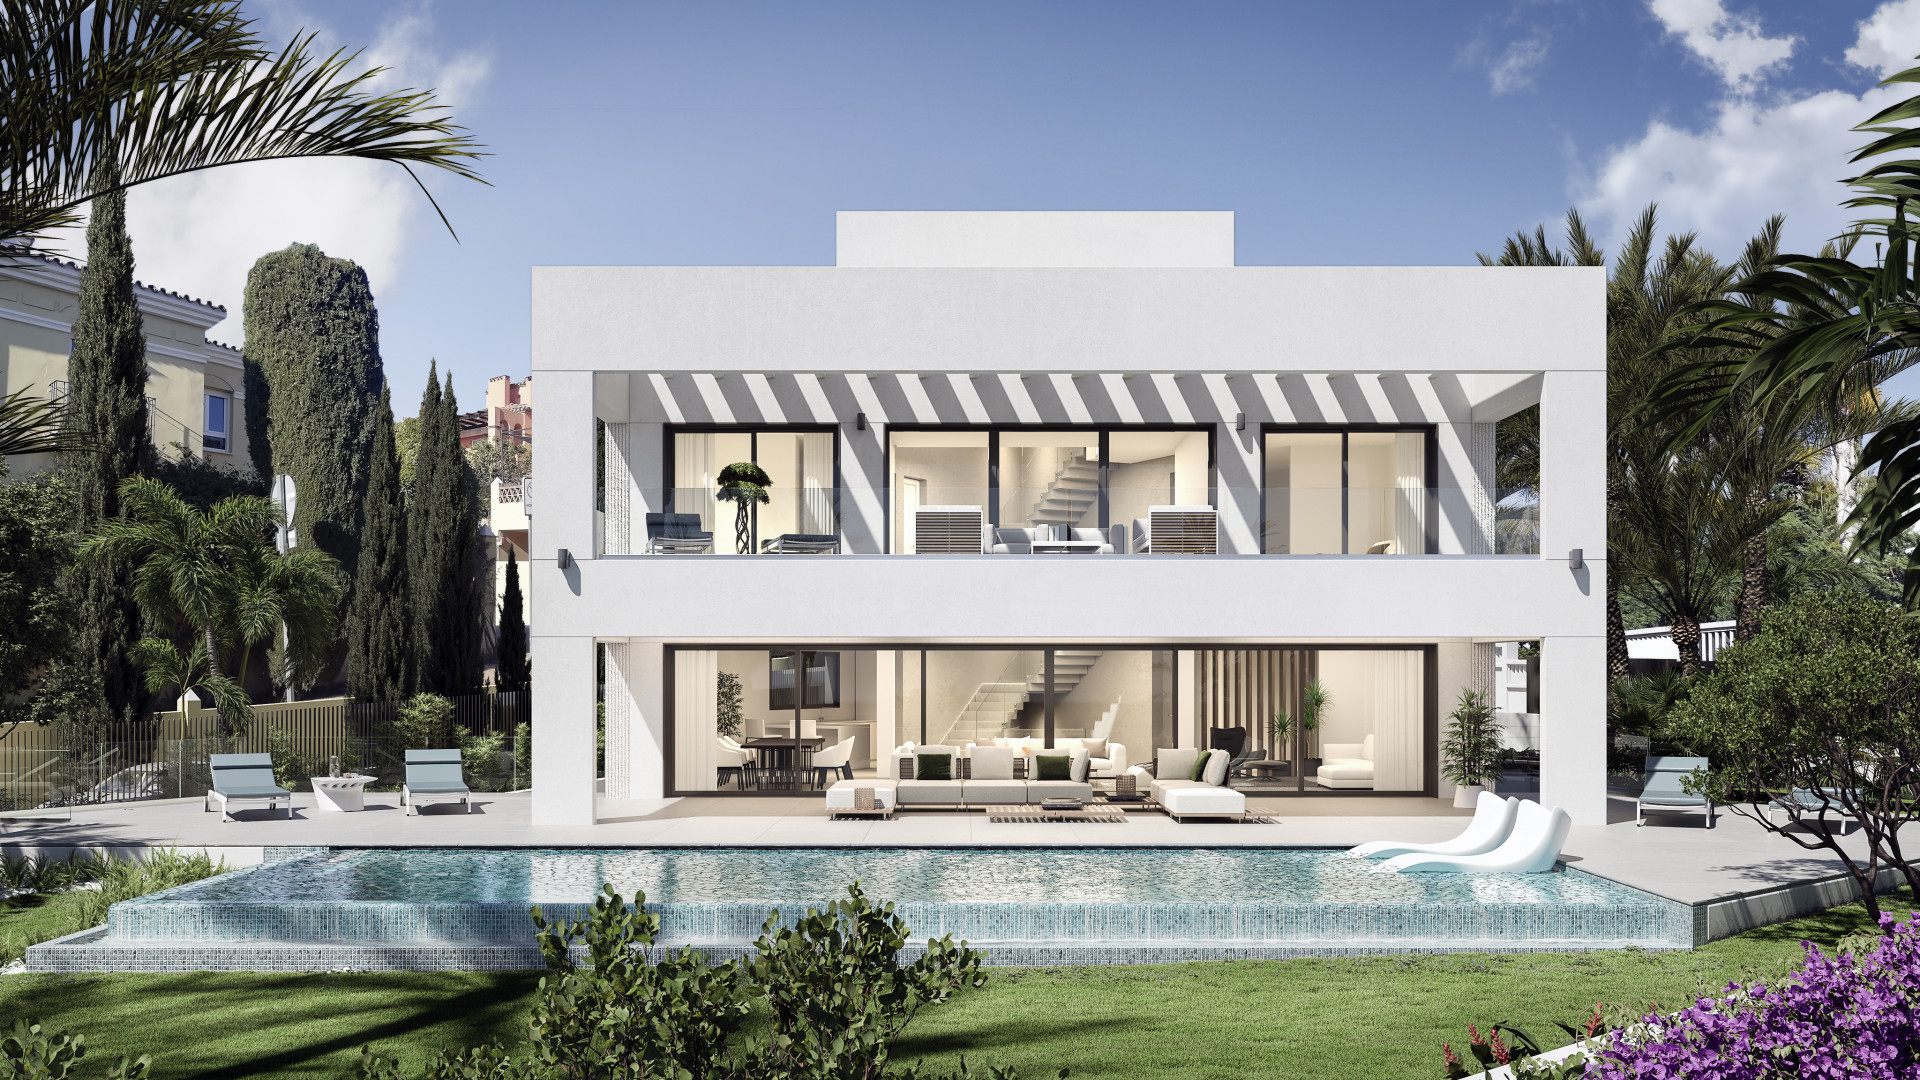 Brand new state-of-the-art design villa located in the most sought after area, Guadalmina Baja